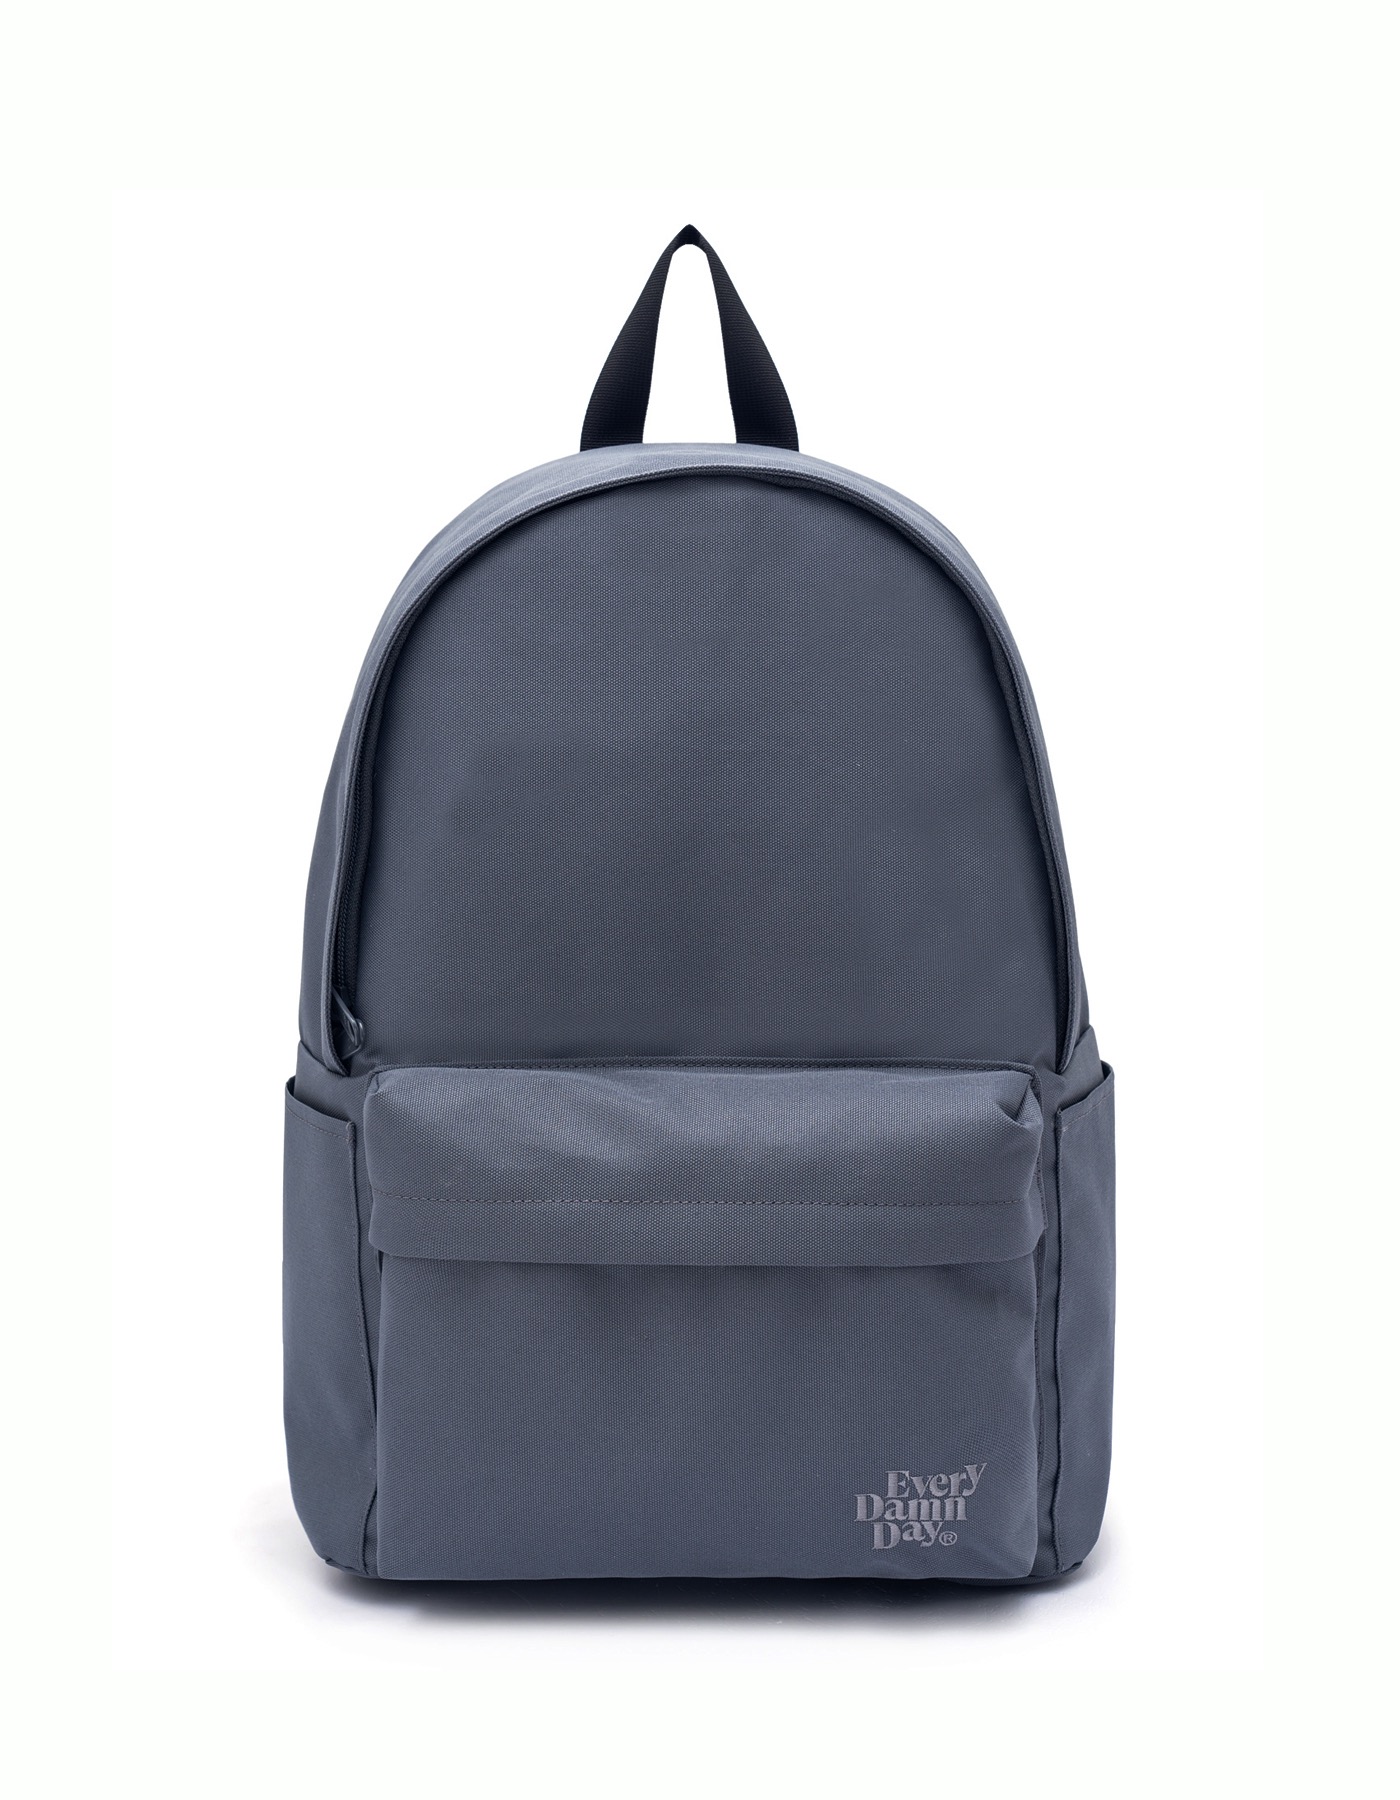 Every Damn Day® Backpack - Grey